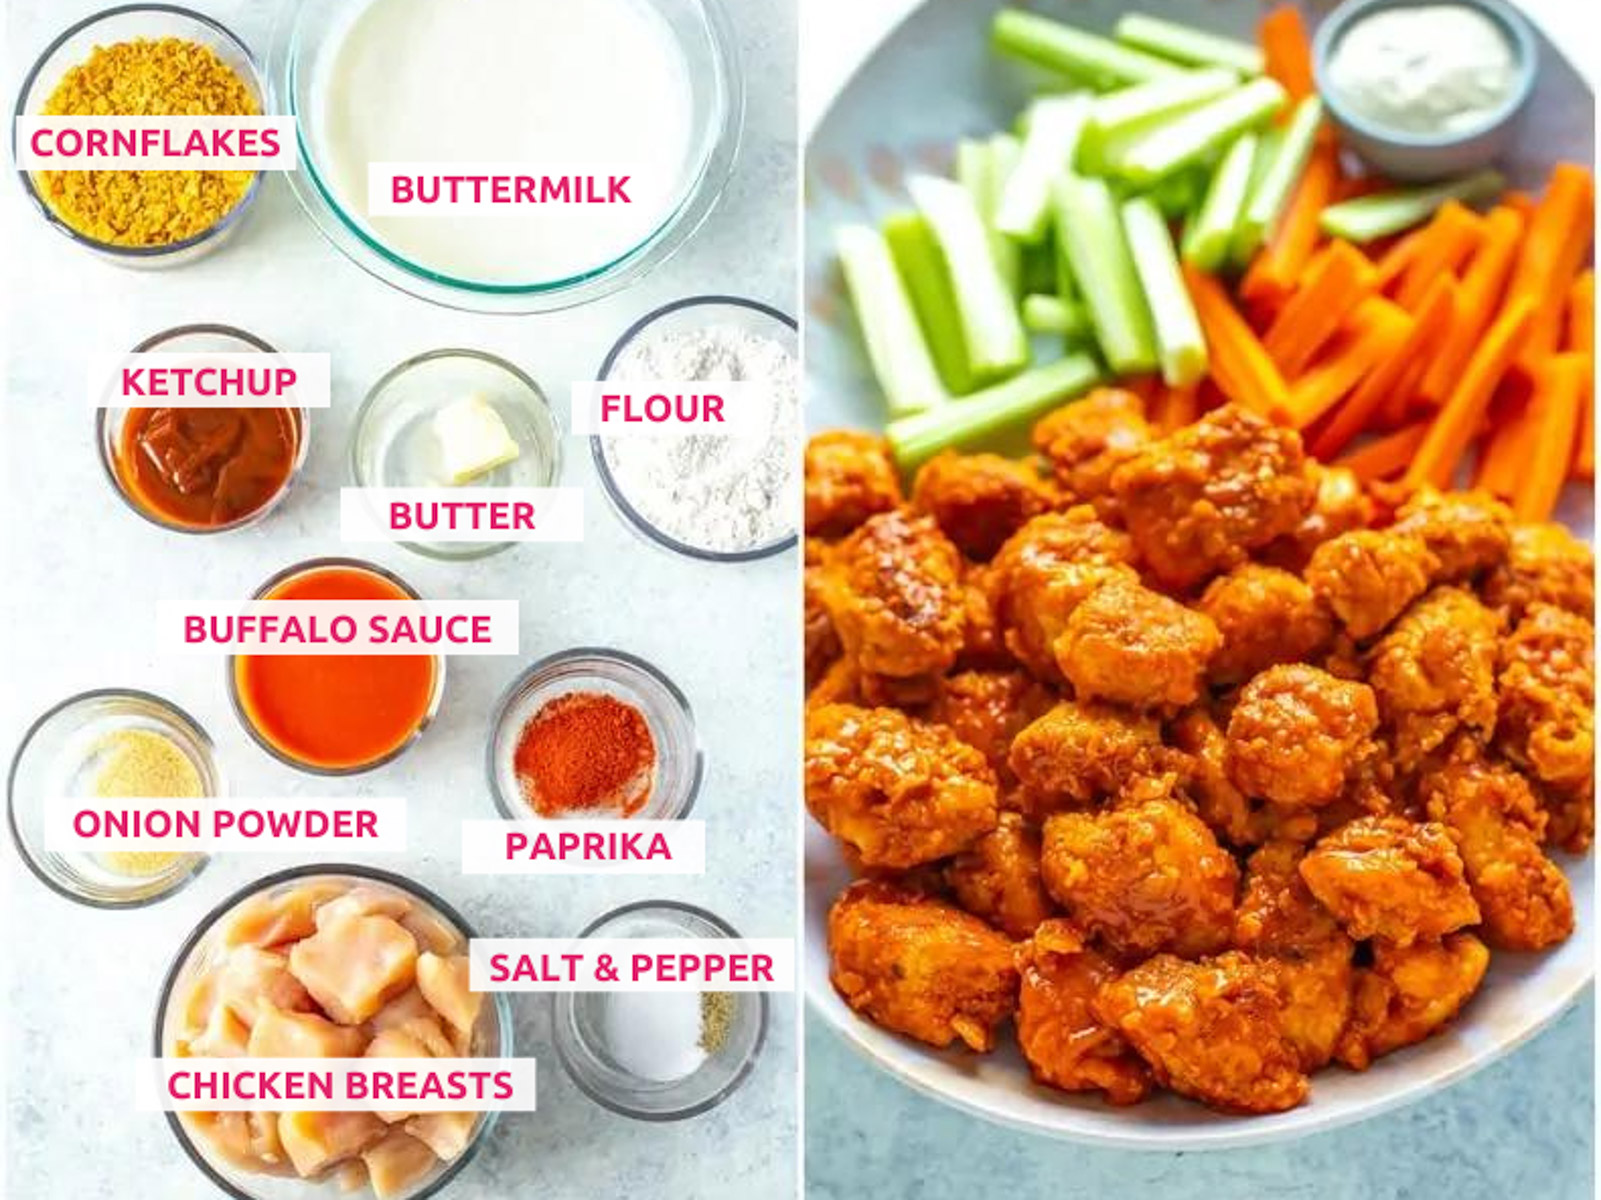 Ingredients for boneless wings: cornflakes, buttermilk, chicken breasts, ketchup, butter, flour, onion powder, buffalo sauce, paprika, salt and pepper.